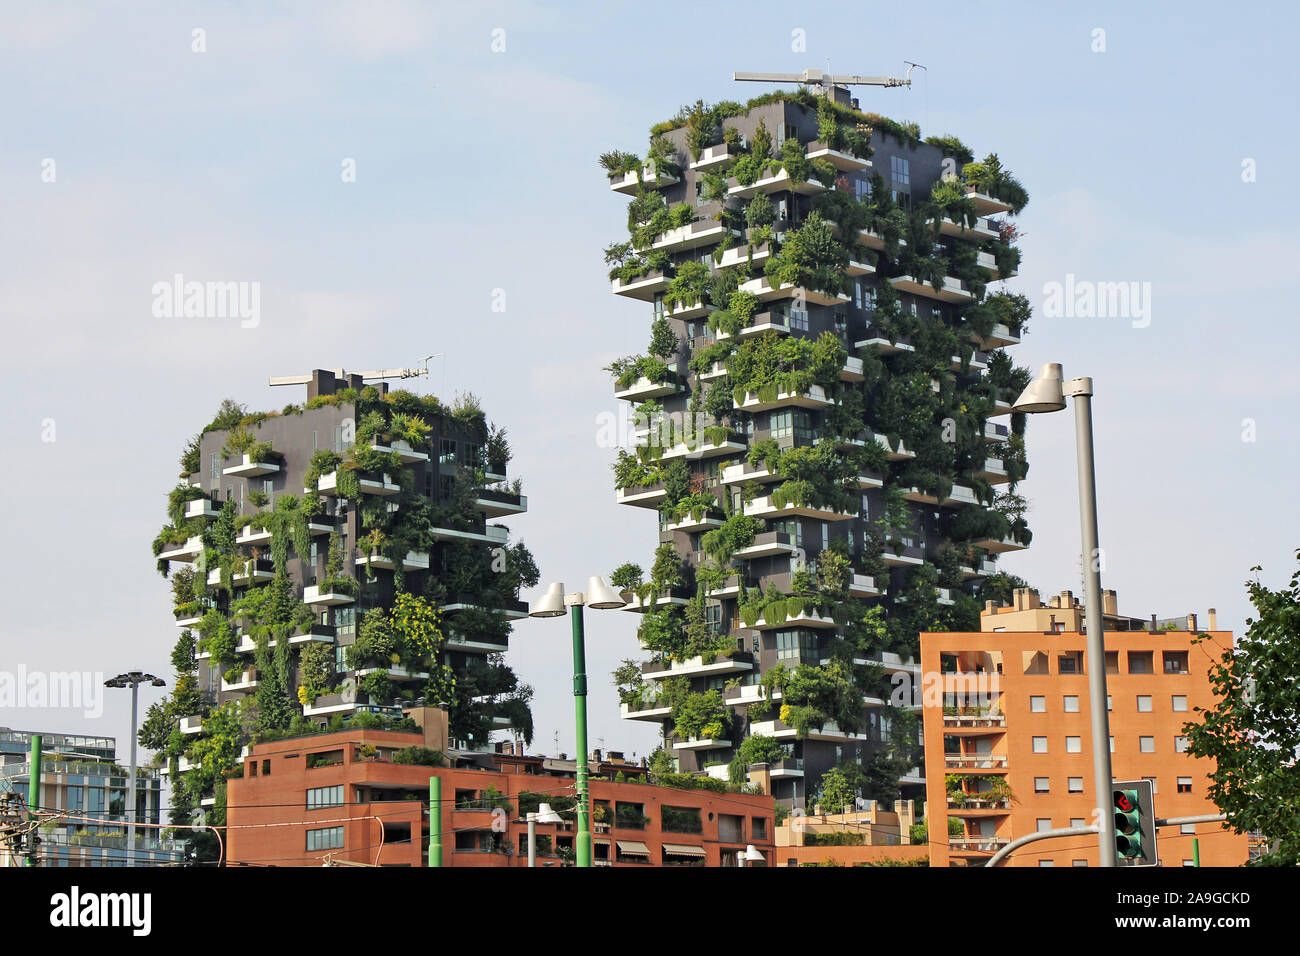 Milan, Italy - June 27, 2017: Residential buildings Bosco Verticale. Vertical Forest residential towers in the business district of Milan, Italy Stock Photo